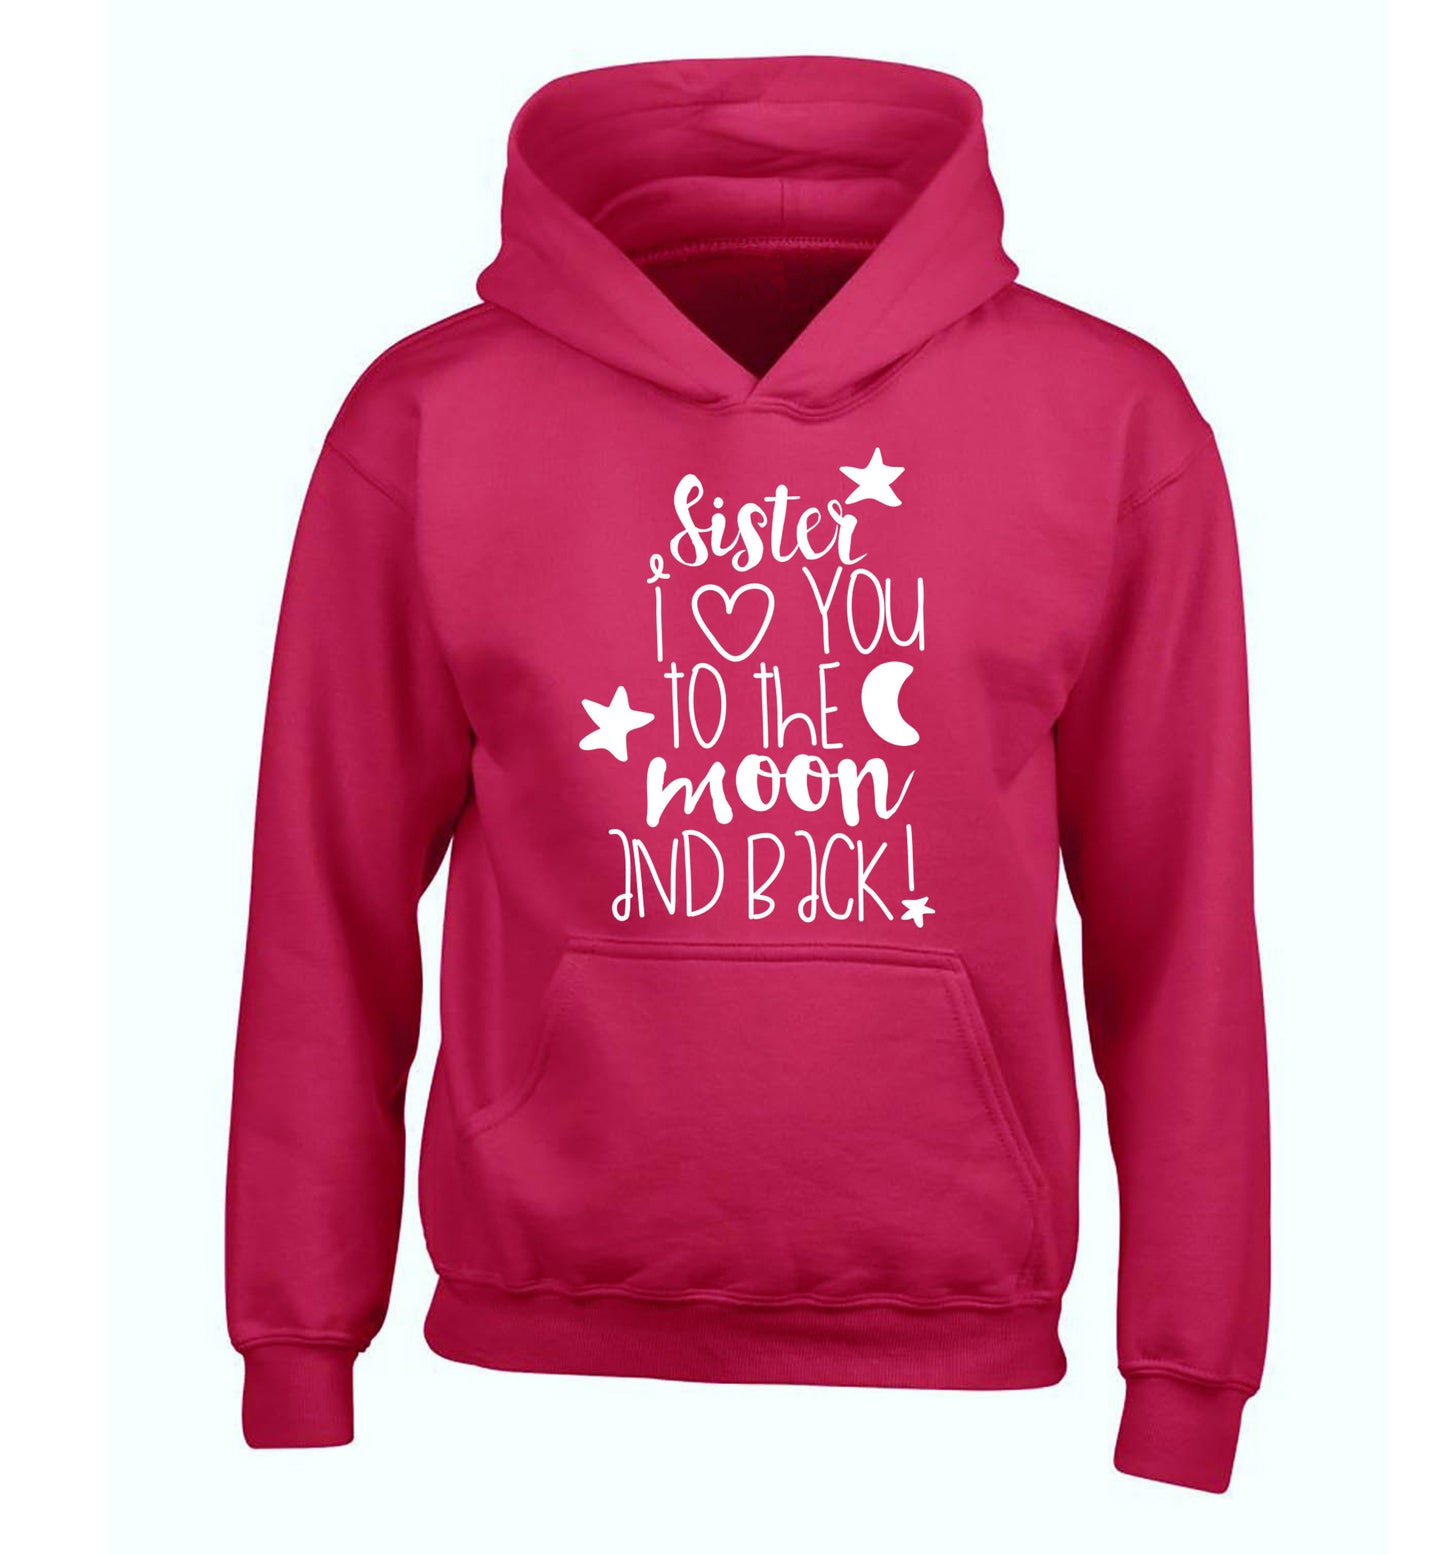 Sister I love you to the moon and back children's pink hoodie 12-14 Years